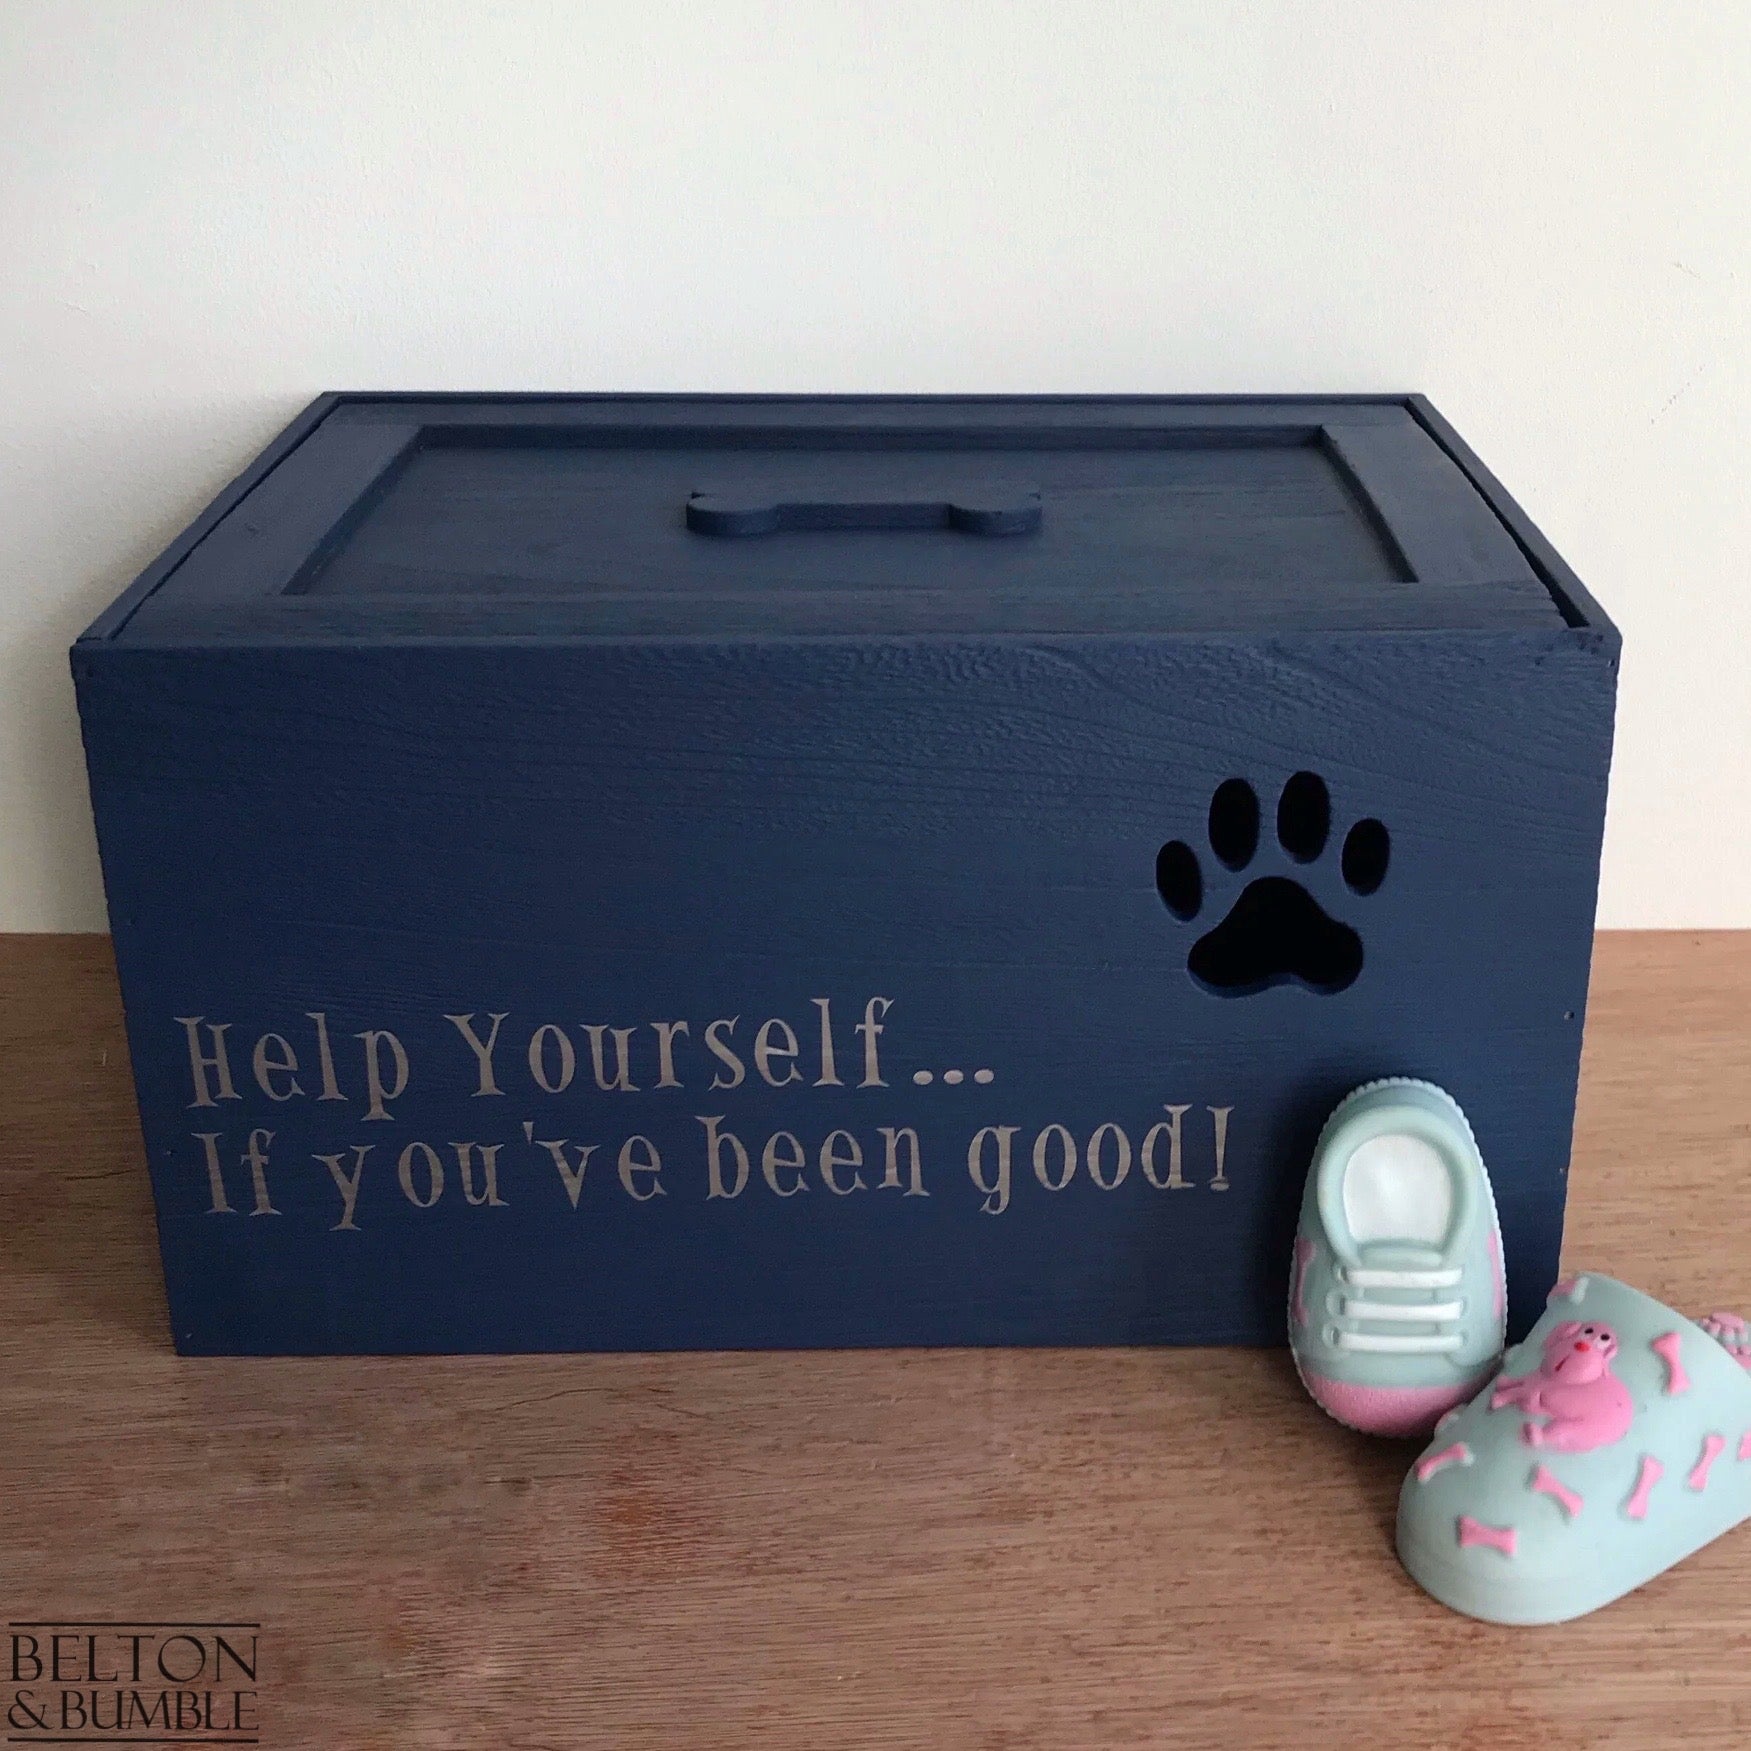 Personalised Painted Wooden Dog Toy Boxes with Lid-Belton & Butler